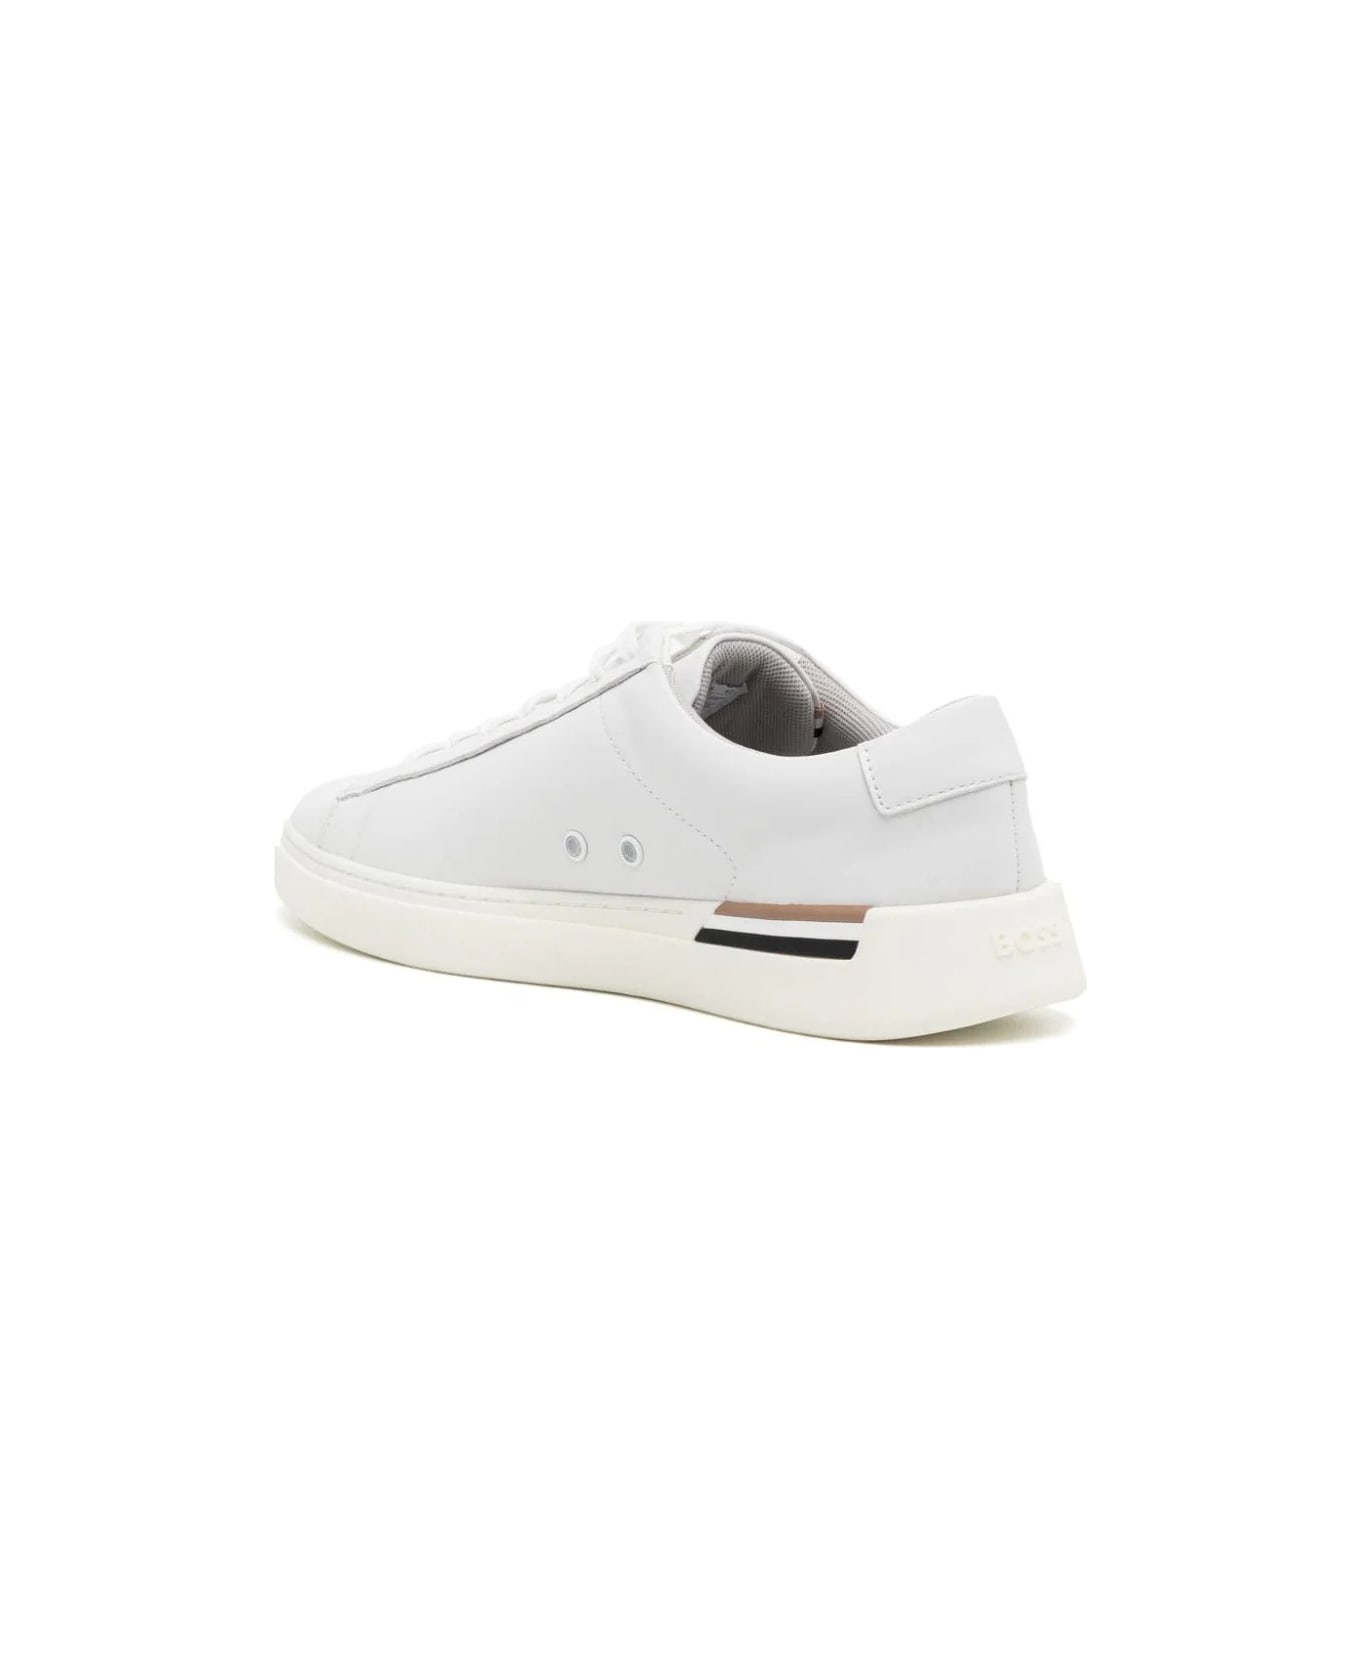 Hugo Boss White Leather Sneakers With Preformed Sole, Logo And Typical Brand Stripes - White スニーカー